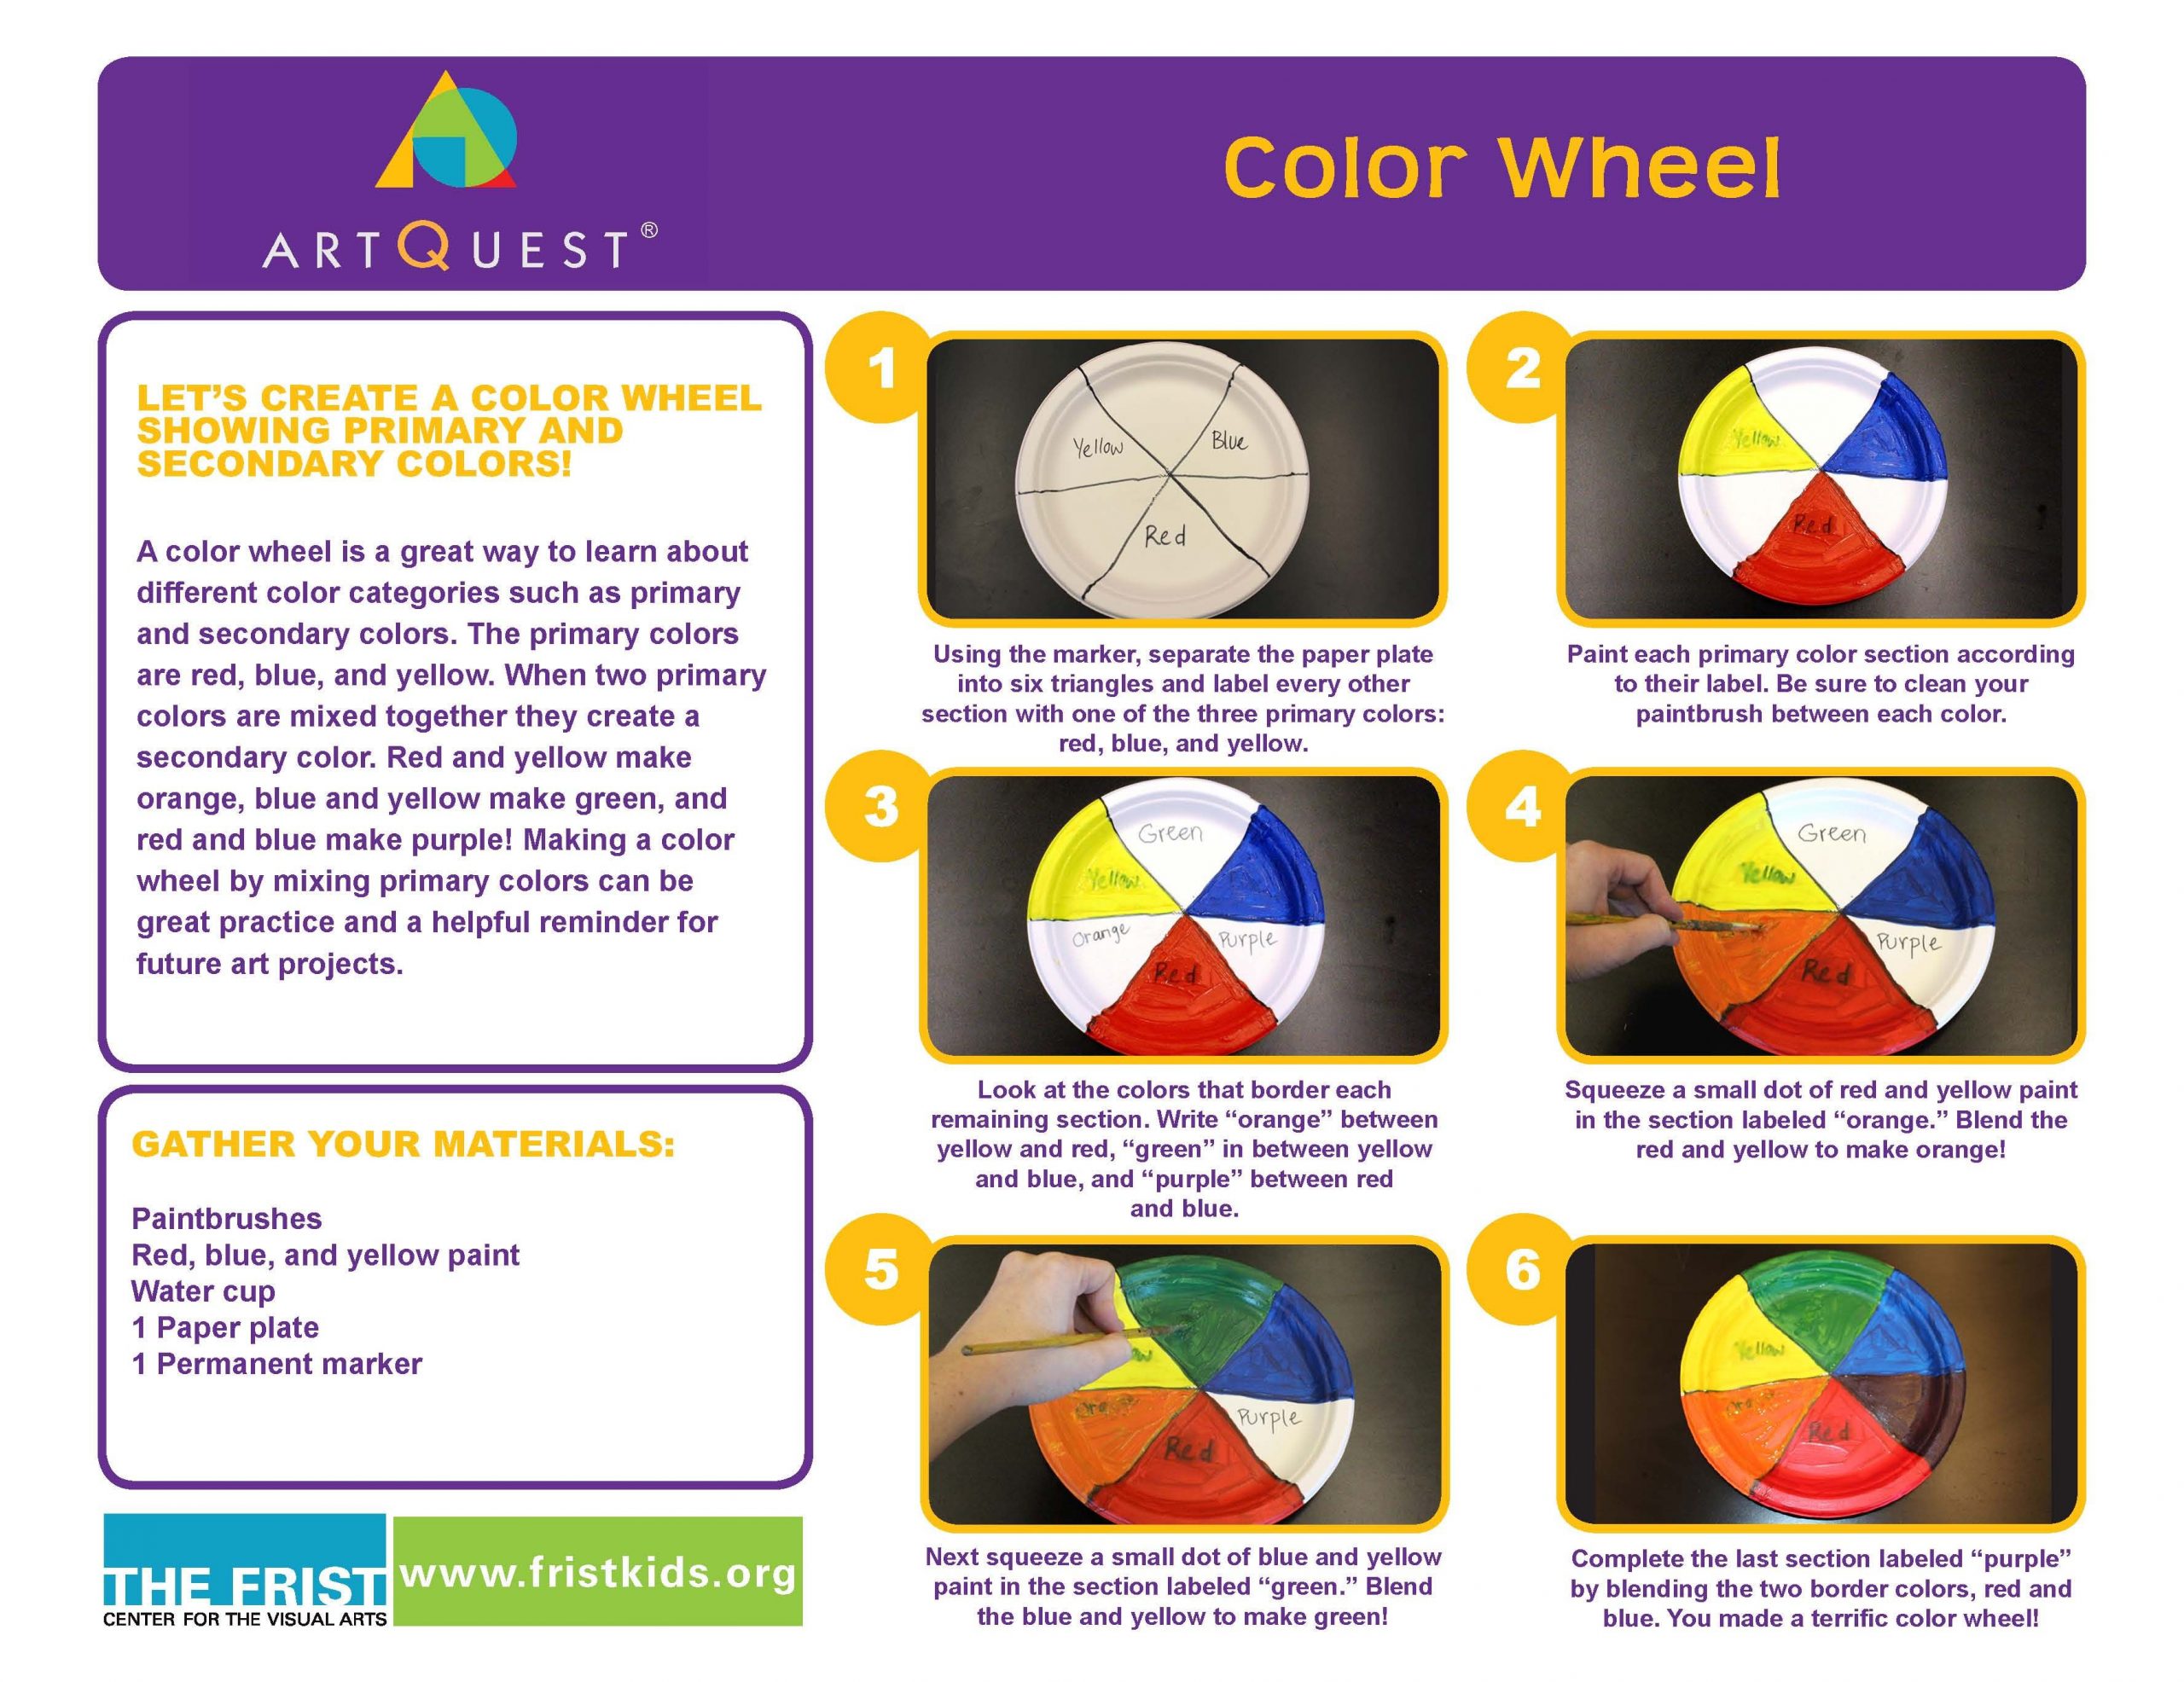 Colors Lesson Plan at Home Activity Color Wheel the Image Above for